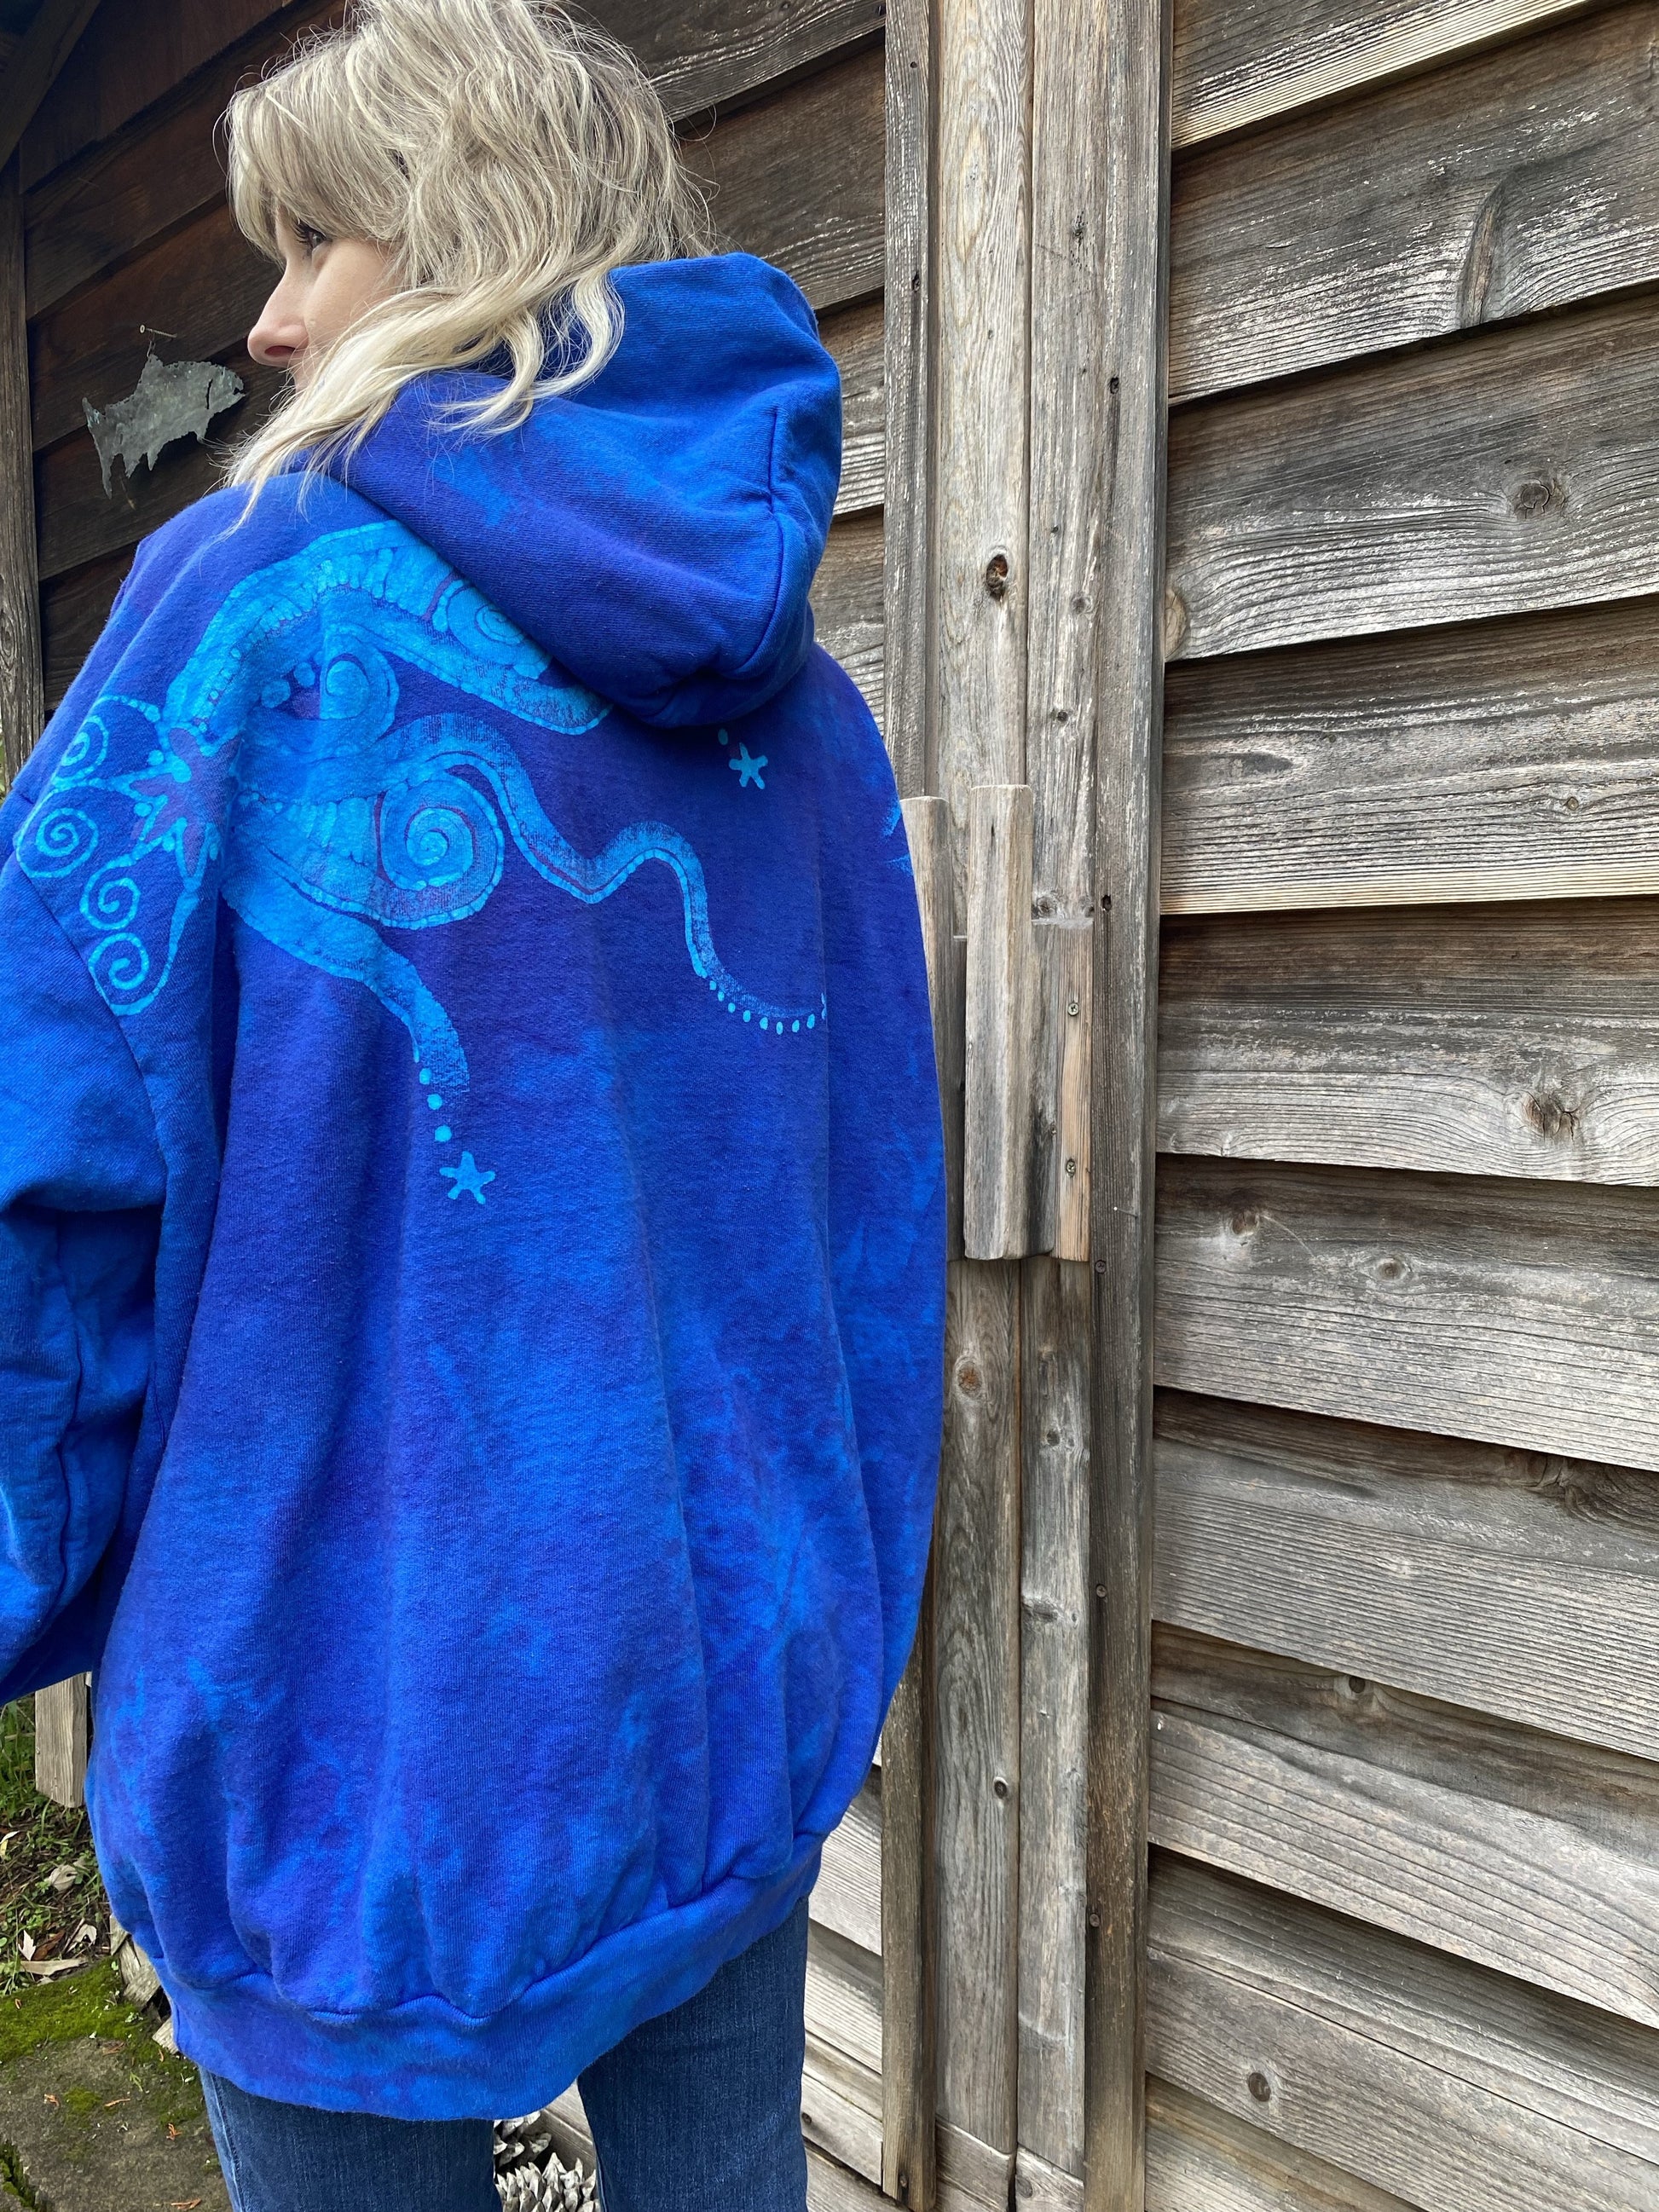 Made for Susanne H. MEMBER EXCLUSIVE Bright Blue Moonlight Cascade Pullover Hoodie - Size 2X hoodie batikwalla 